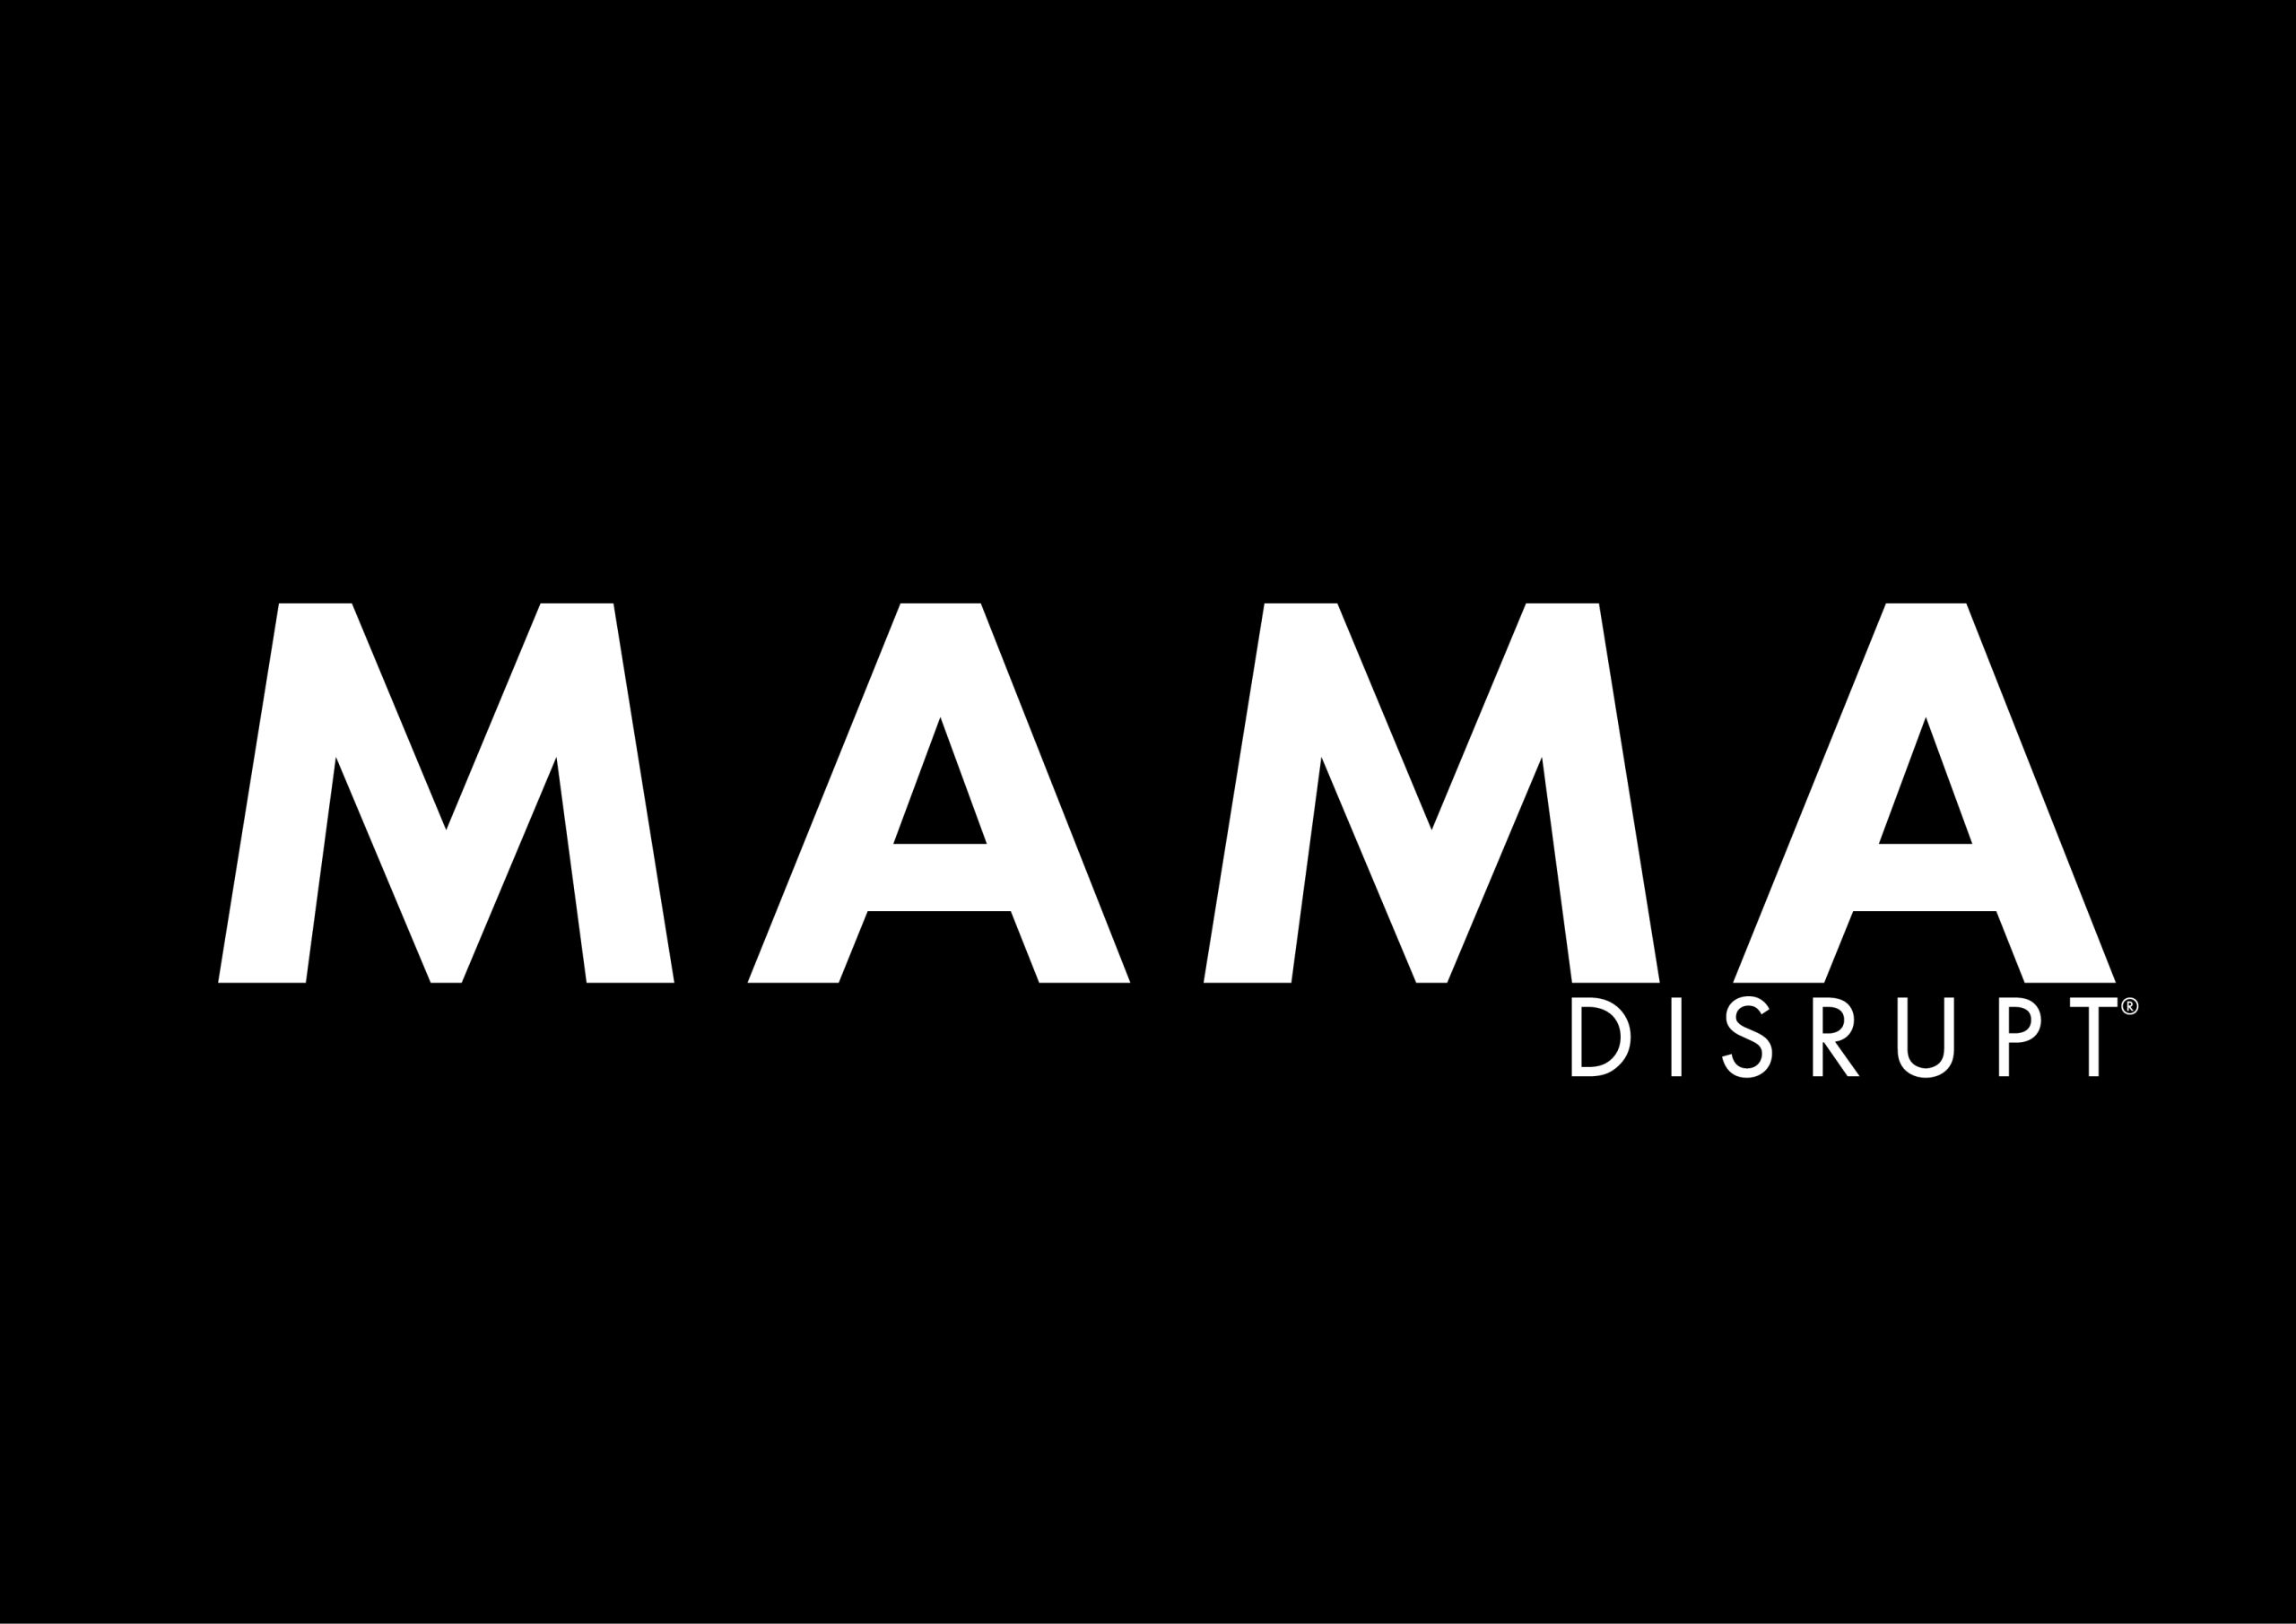 Mama Disrupt® - For the Woman Inside the Mother